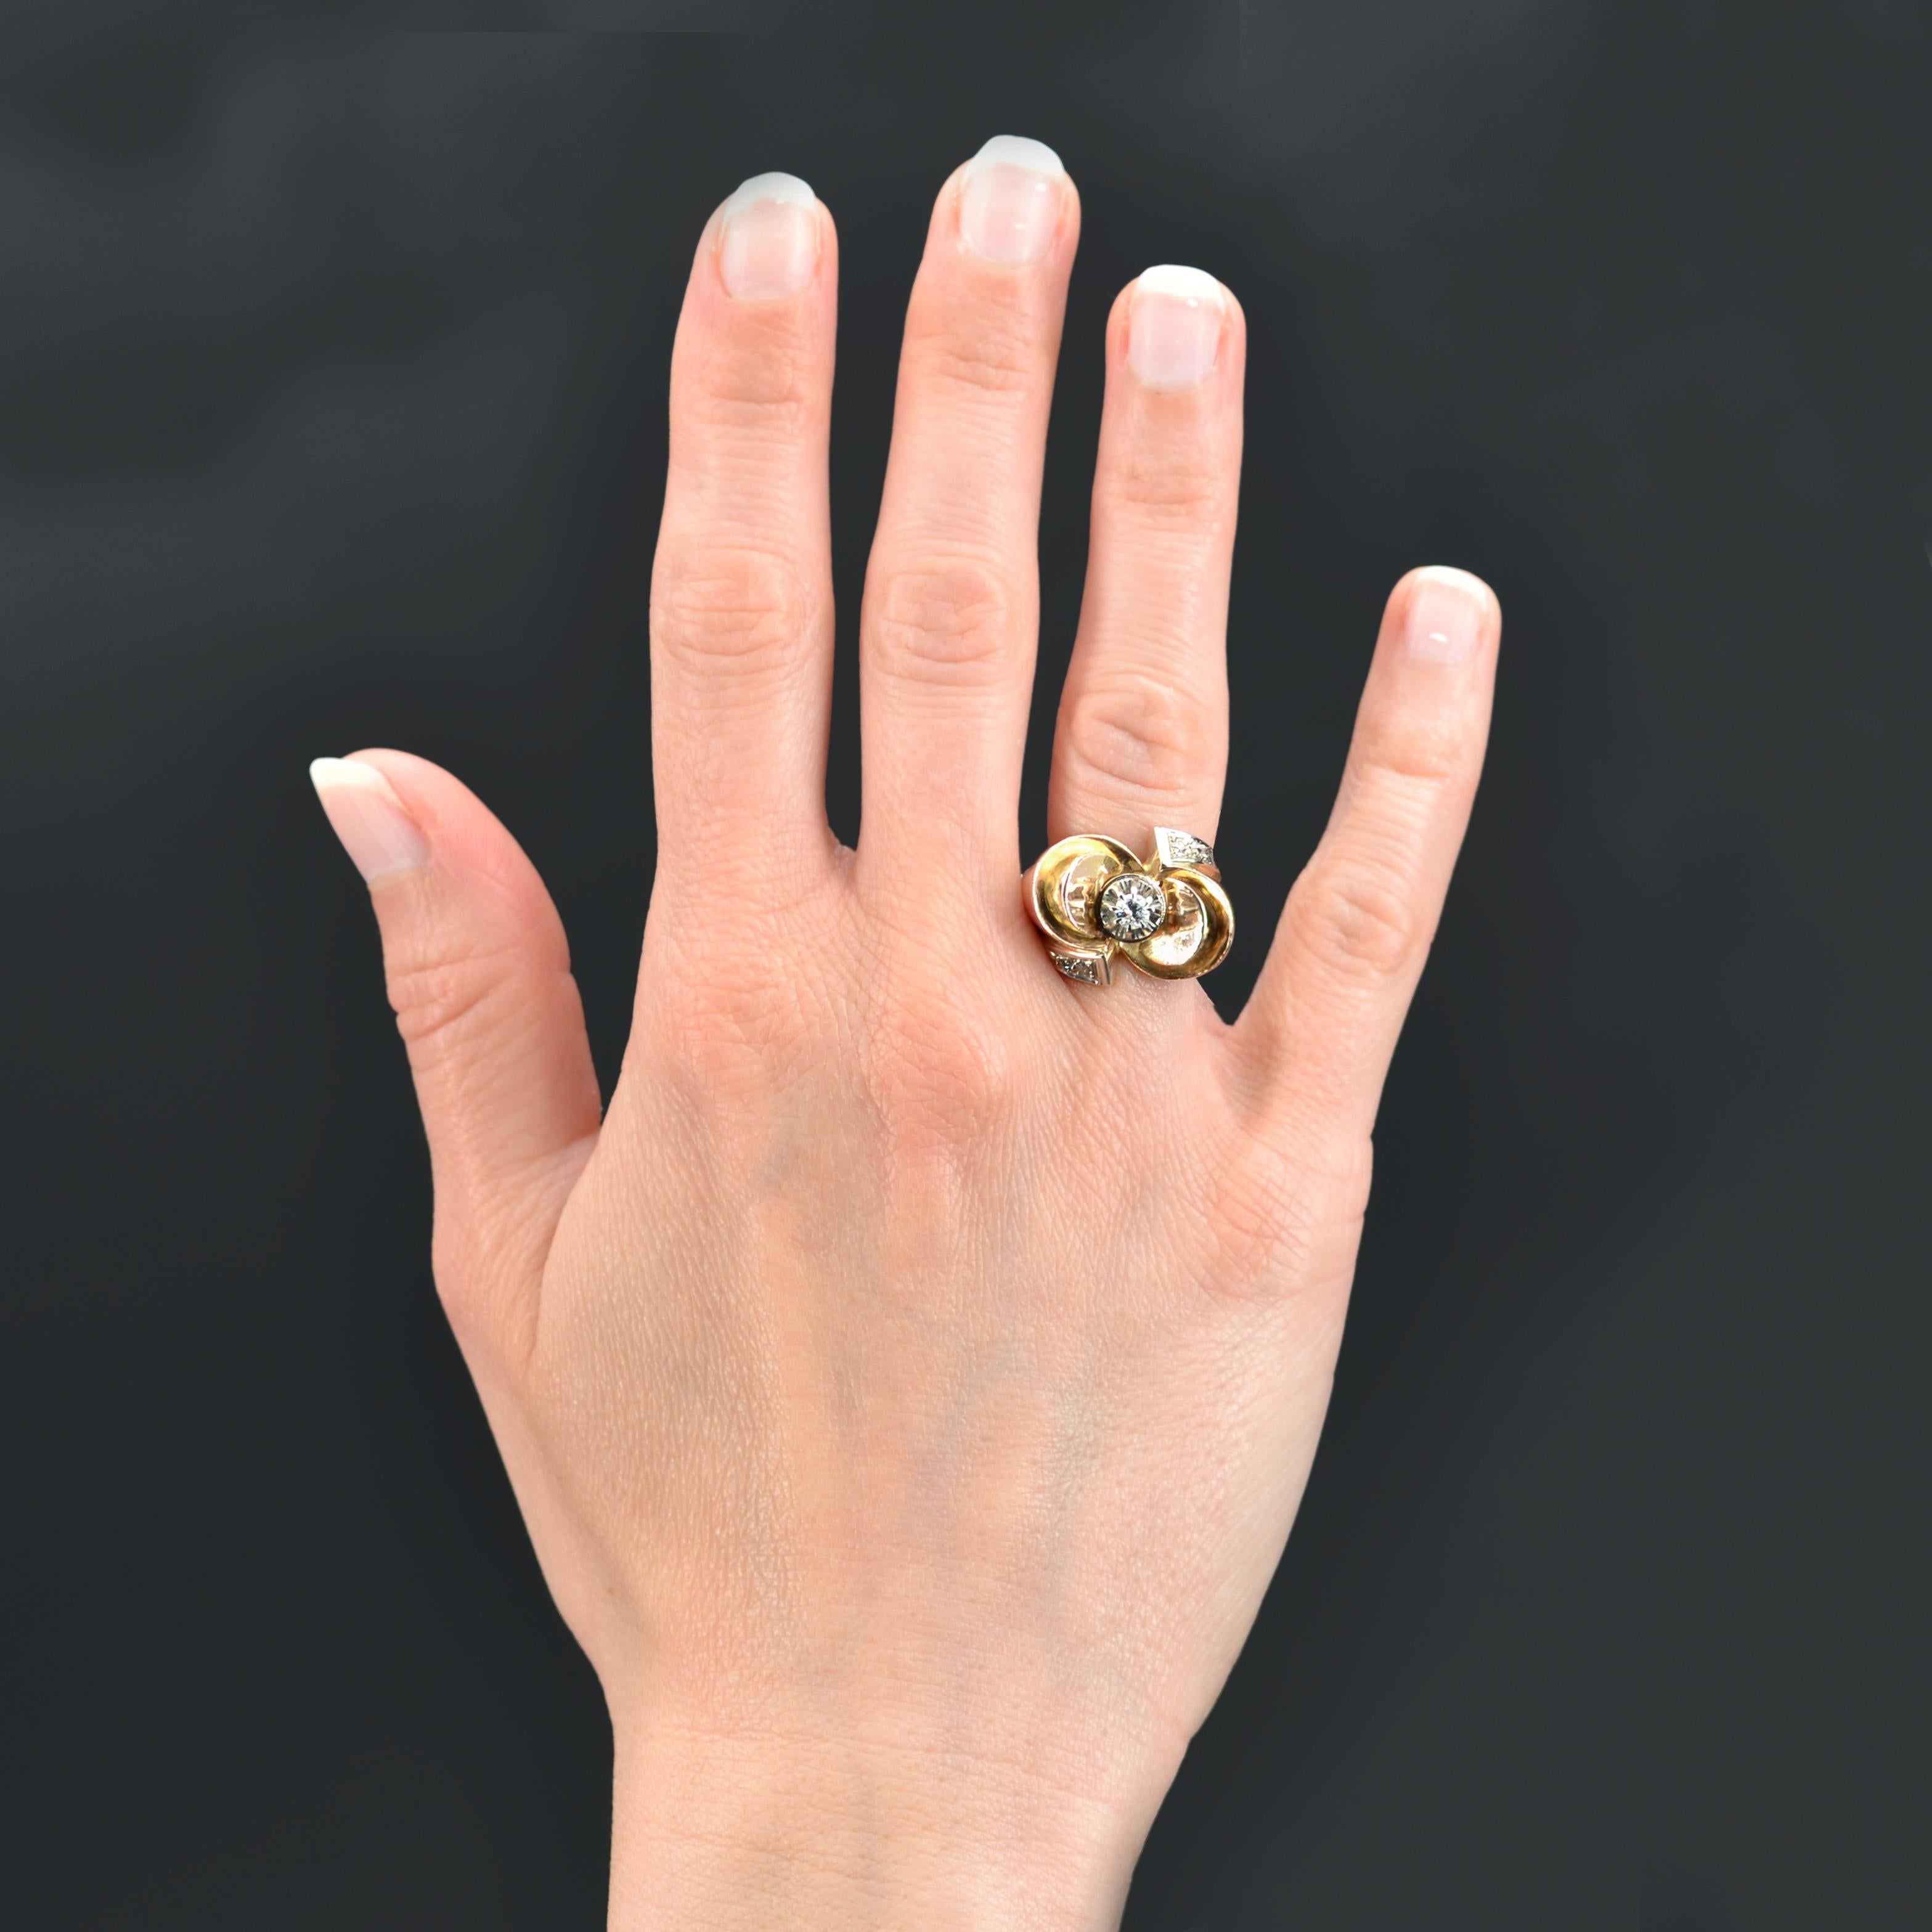 Ring in 18 karat rose gold, eagle head hallmark, and platinum, dog head hallmark.
Retro ring, its mounting forms an important knot decorated in the center of an intermediate brilliant- cut diamond retained with platinum claws. On either side of the